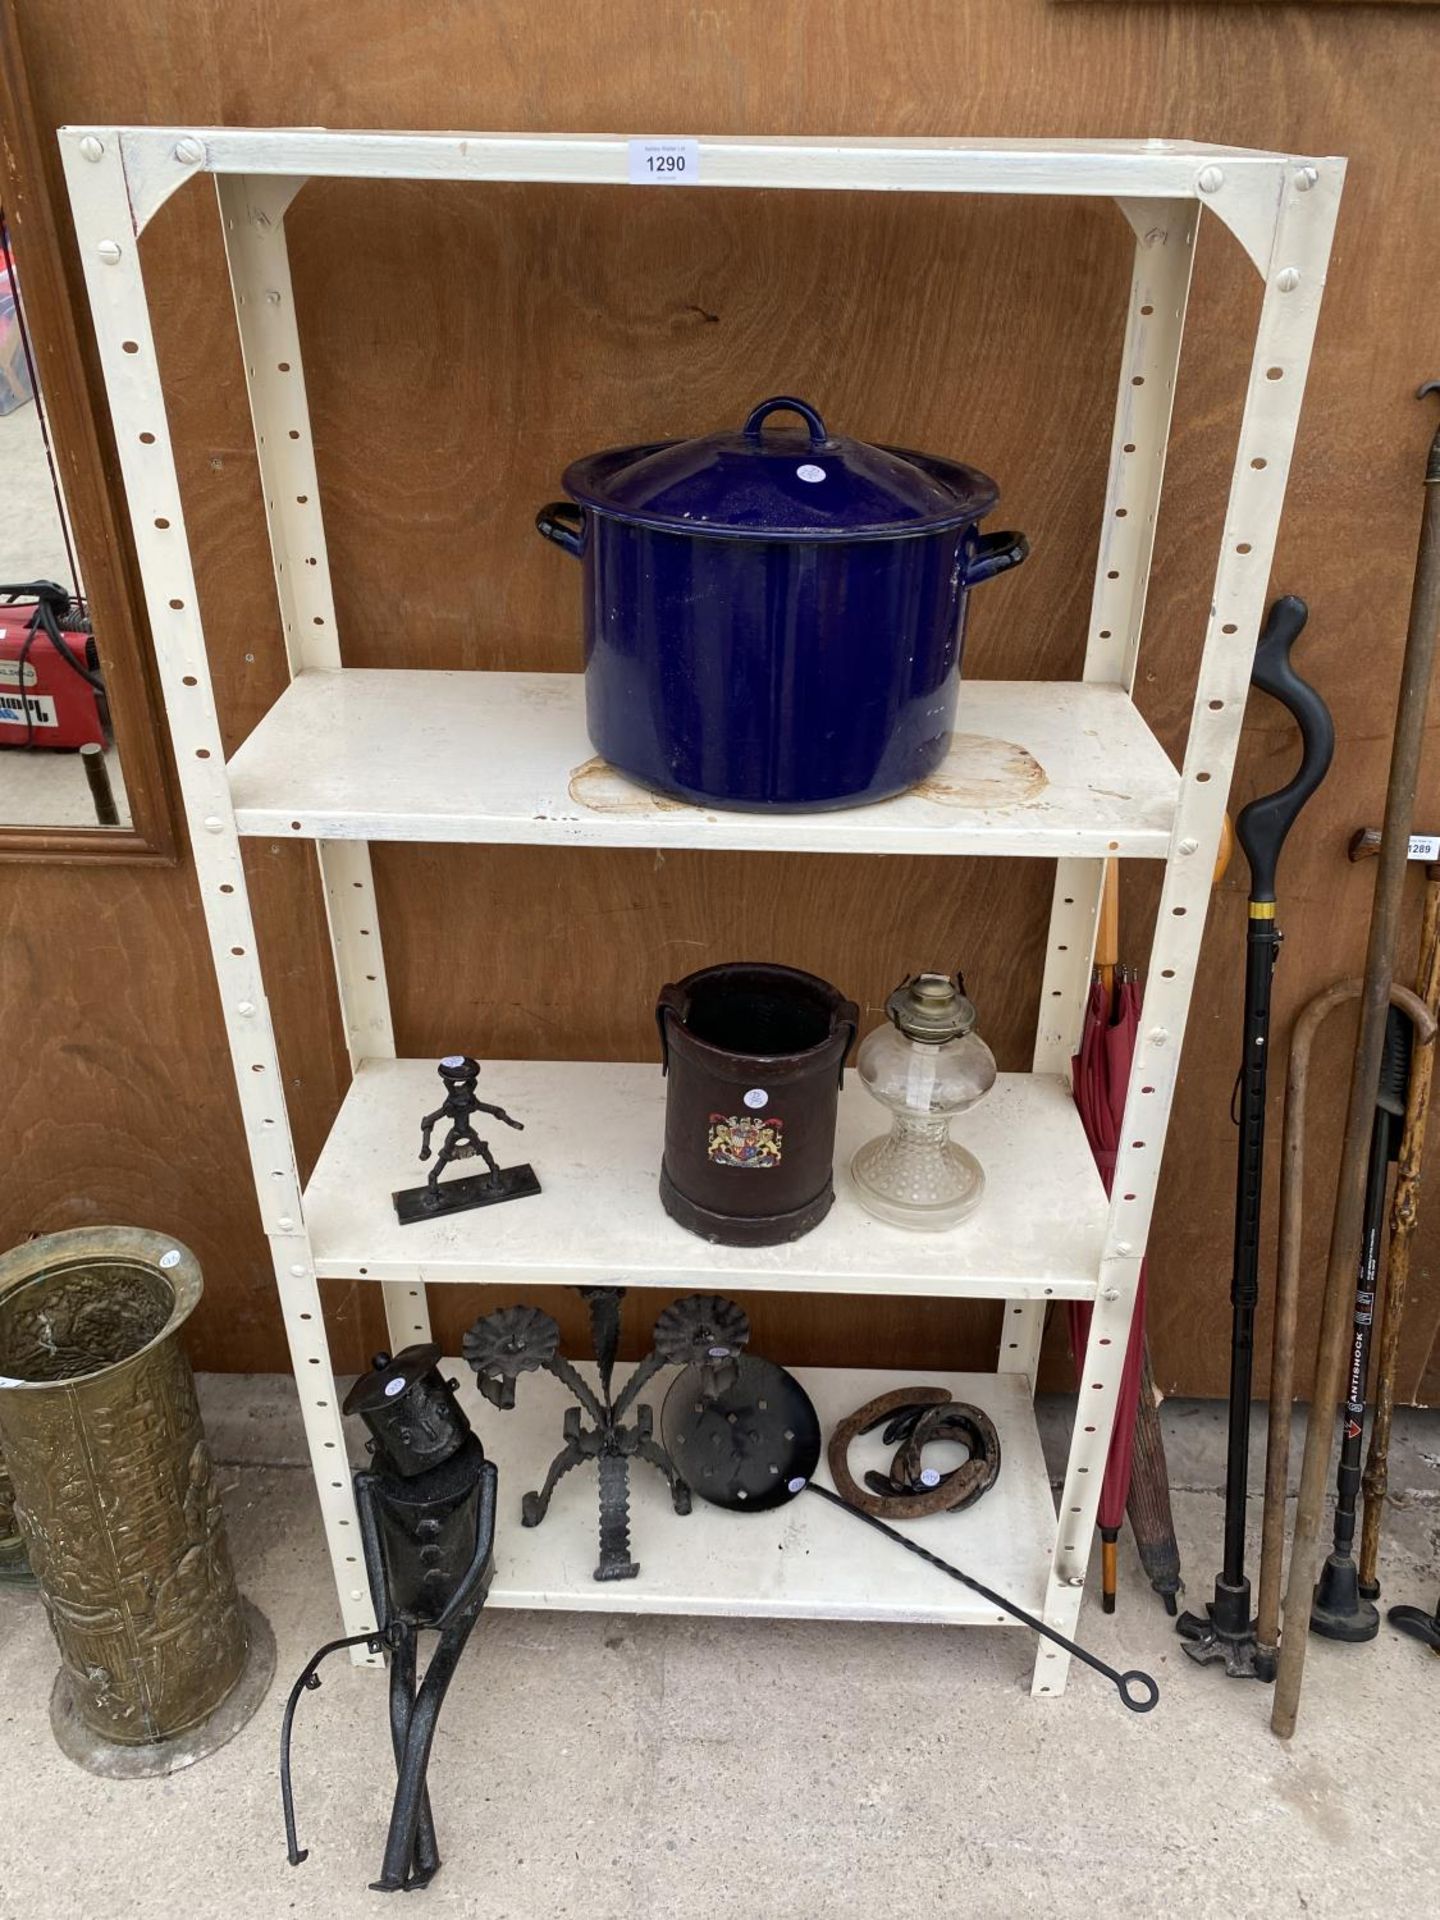 A FOUR TIER METAL SHELVING UNIT WITH CONTENTS TO INCLUDE A COOKING POT, HORSE SHOES AND AN OIL